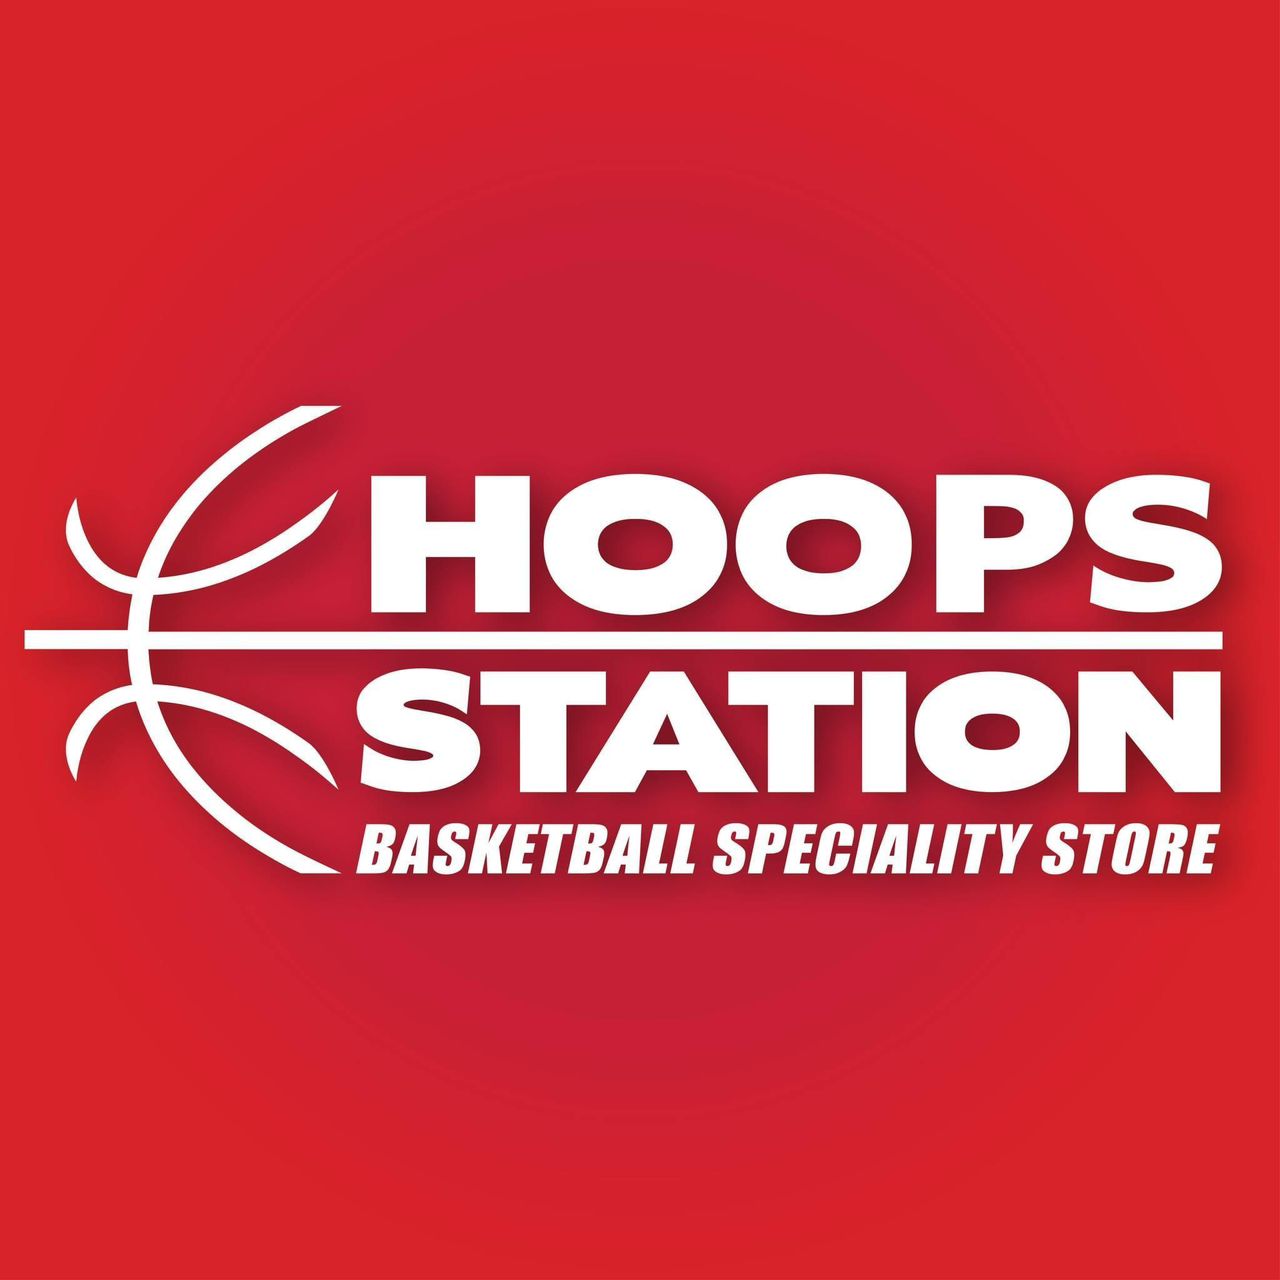 HOOPS STATION